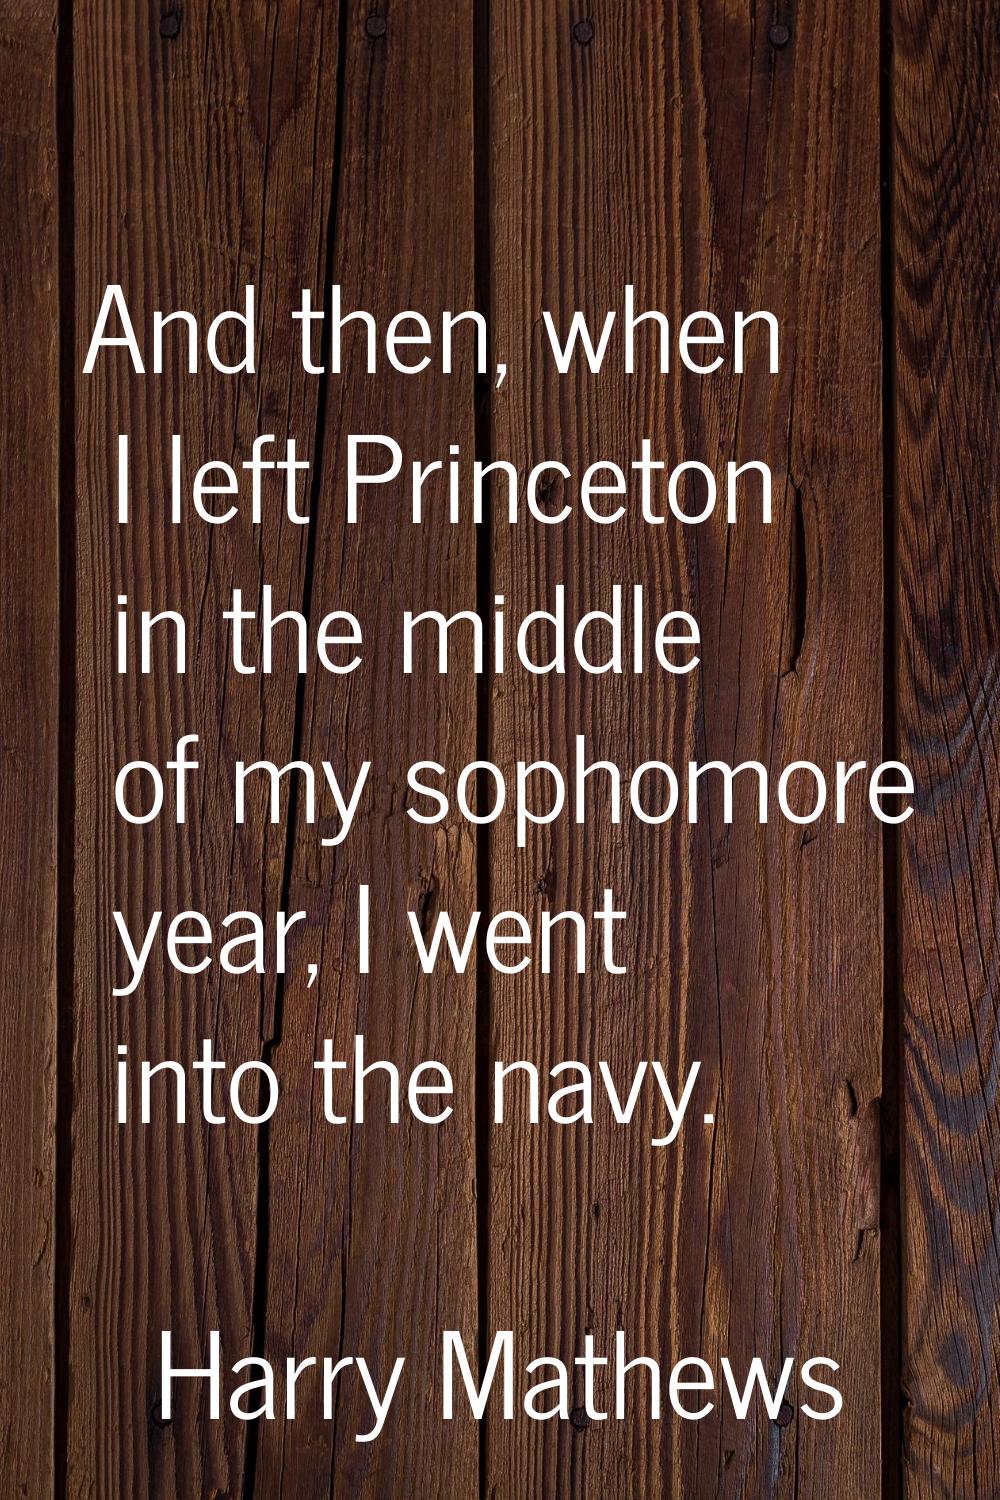 And then, when I left Princeton in the middle of my sophomore year, I went into the navy.